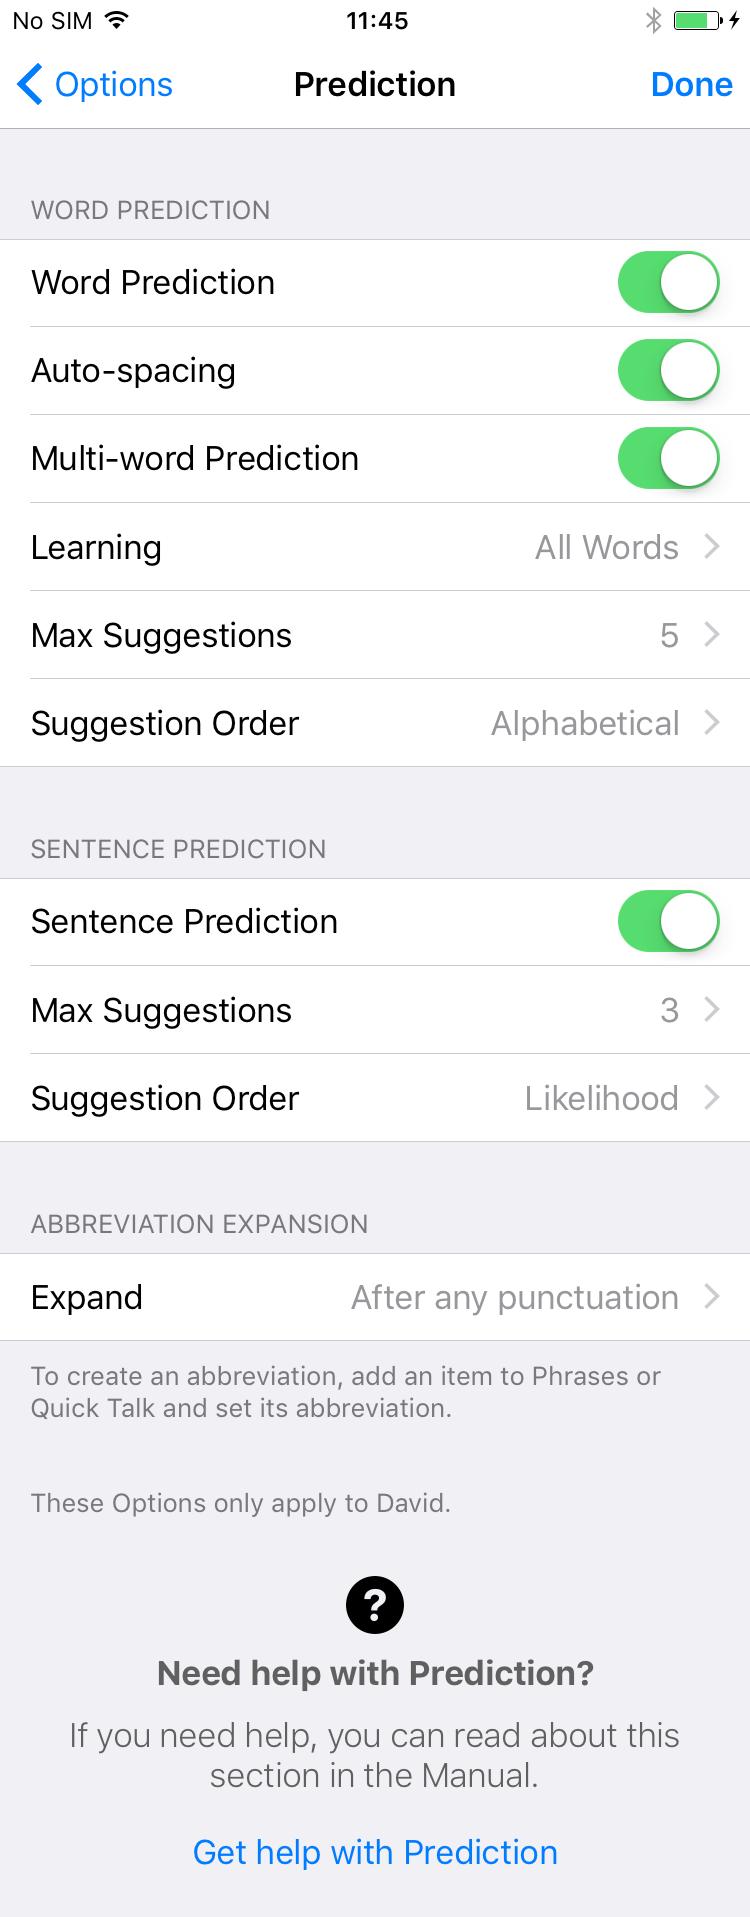 12. Options: Prediction 18 WORD PREDICTION Turn Auto-spacing OFF if you do not want the automatic spacing after selecting a suggestion.